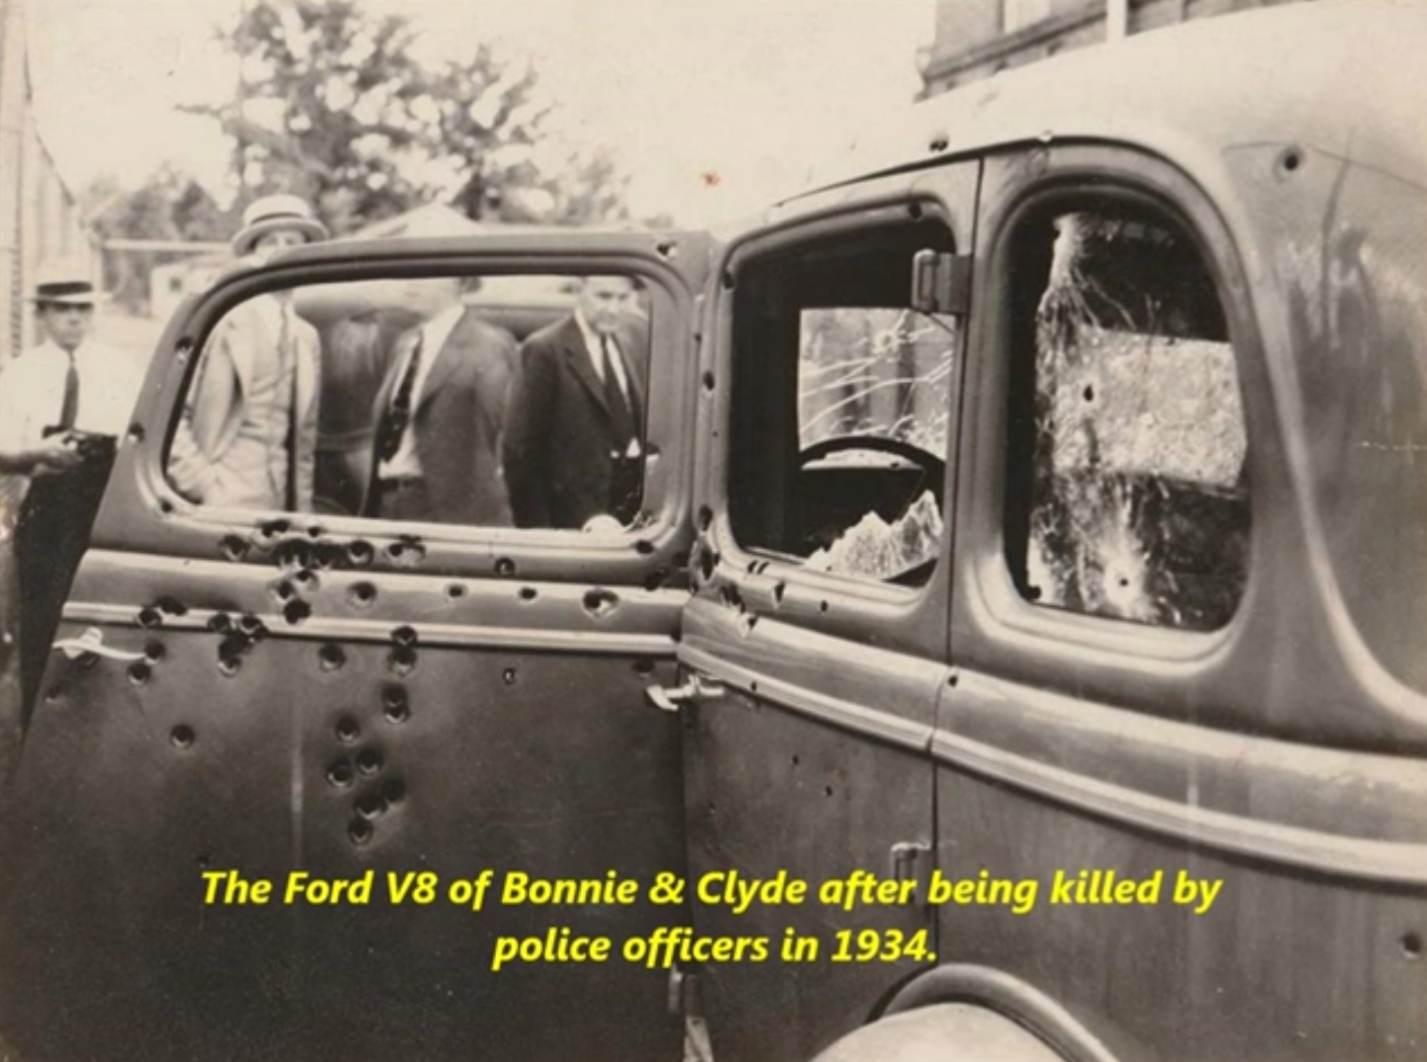 The Ford V8 of Bonnie & Clyde after being killed by police officers in 1934.